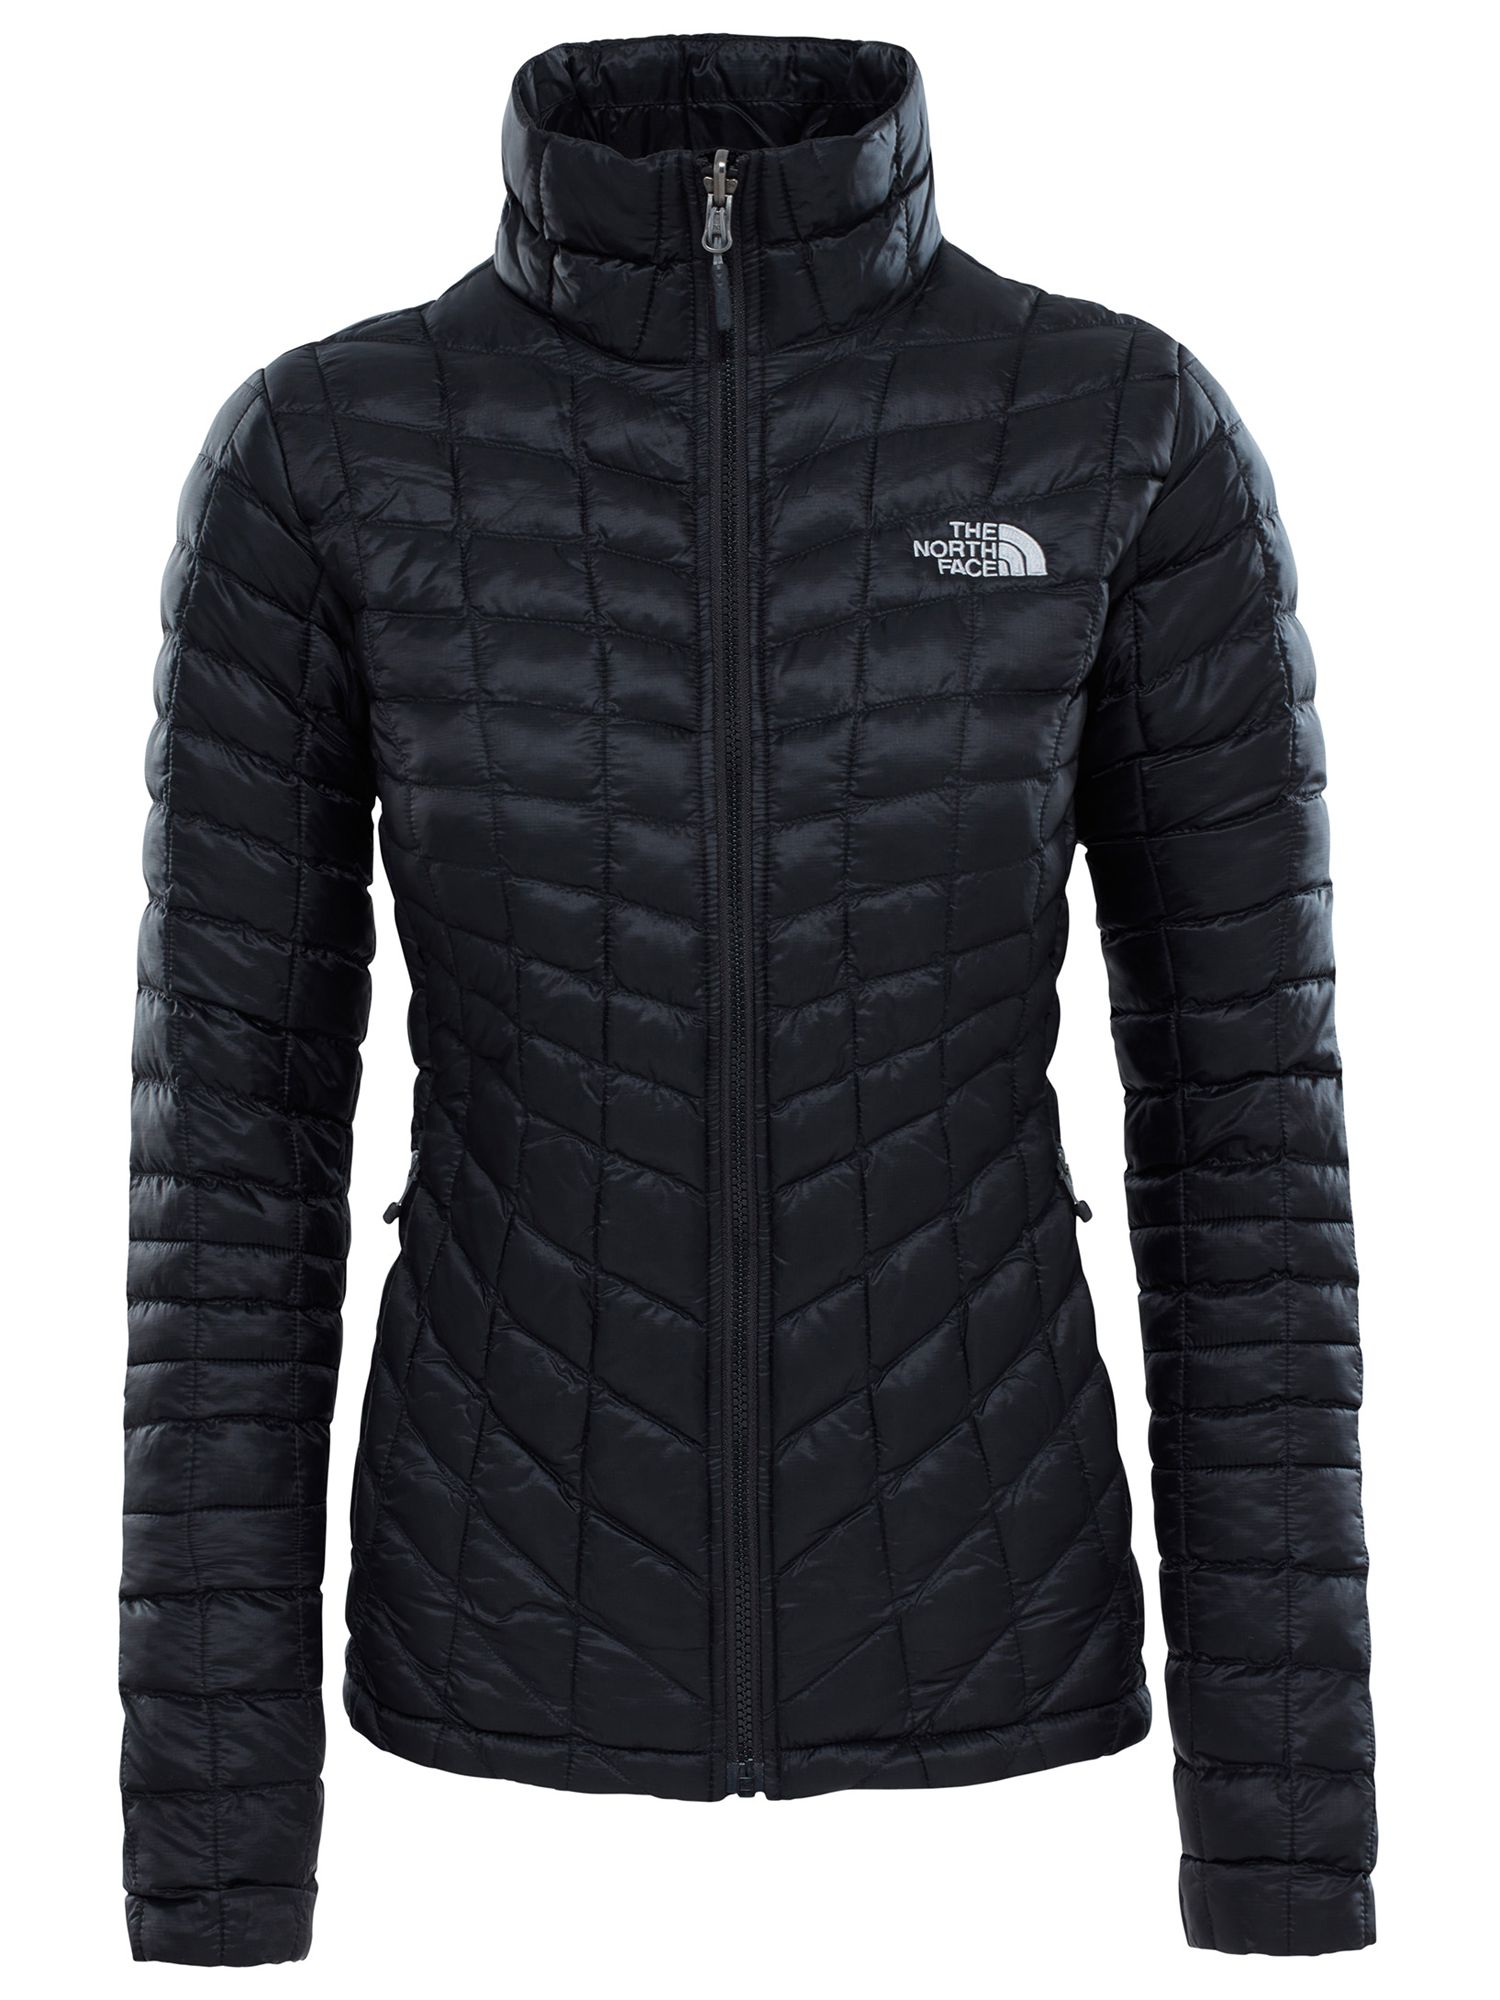 women's thermoball jacket sale